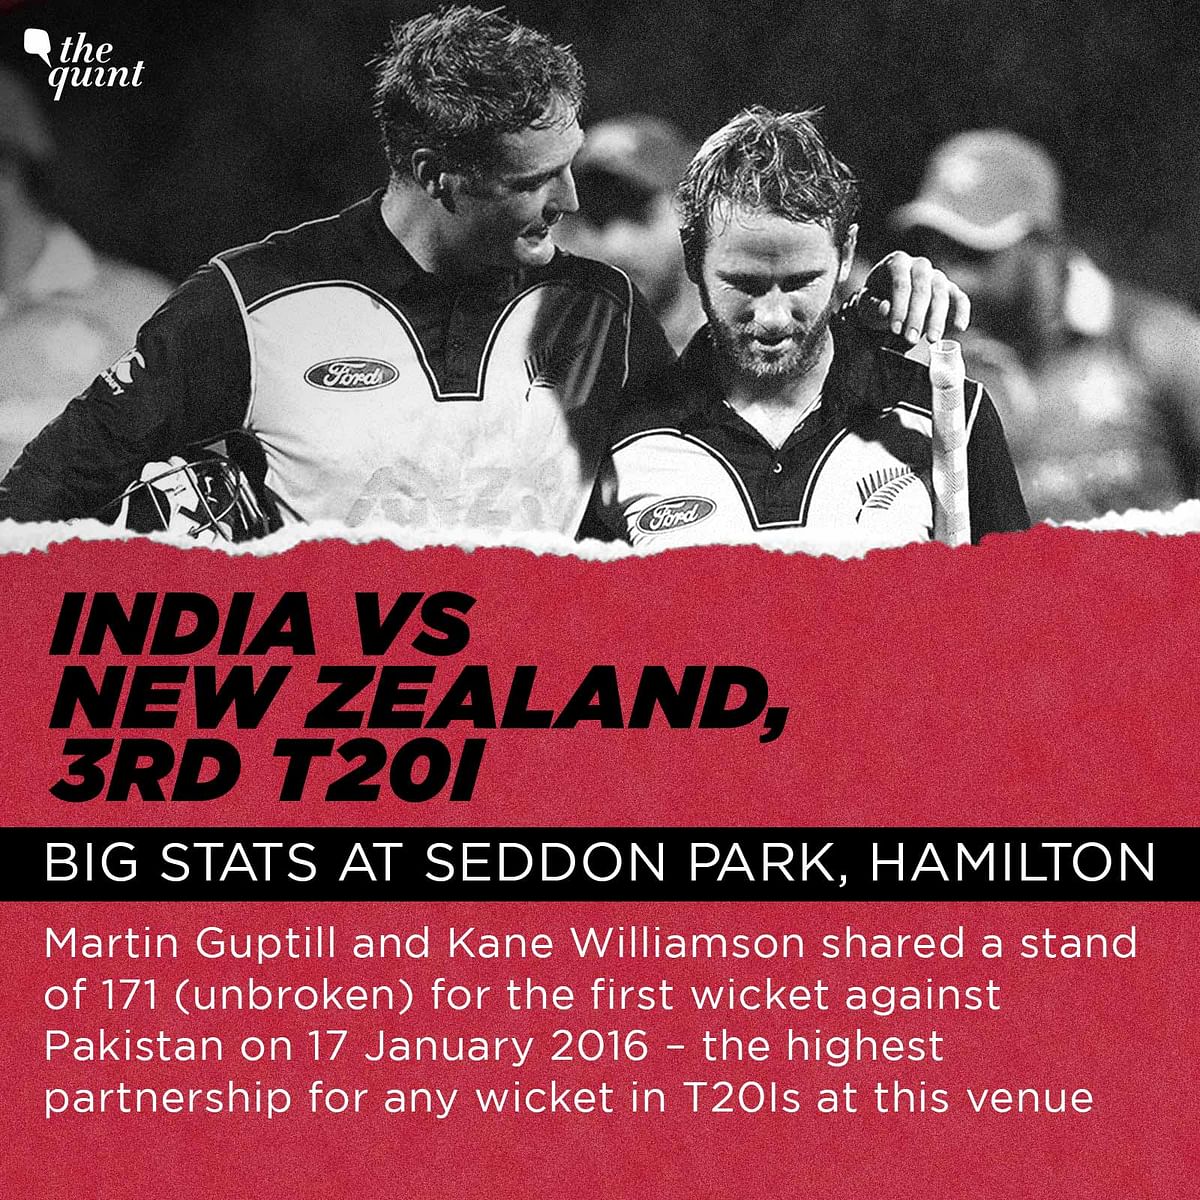 Here’s a look at some of the numbers and records in T20s from the Seddon Park in Hamilton.